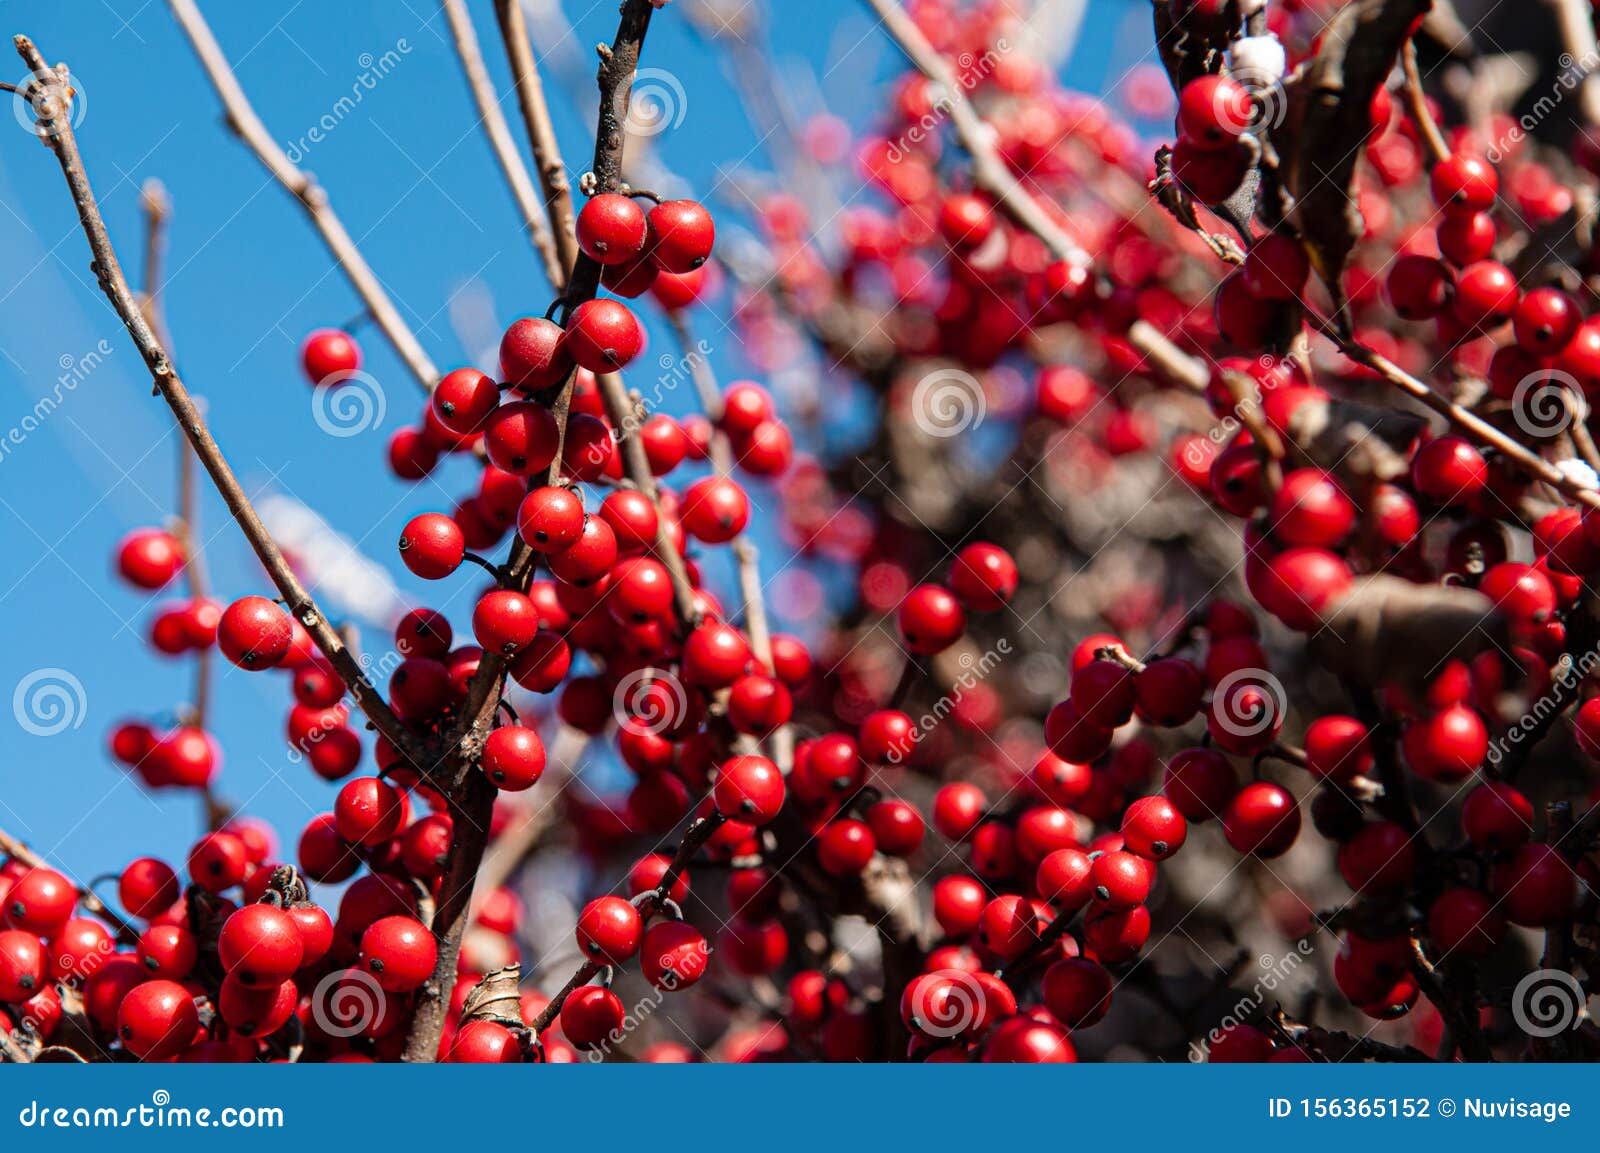 Red Winter Berry Holly Berry Close Up Details Stock Photo - Image of ...